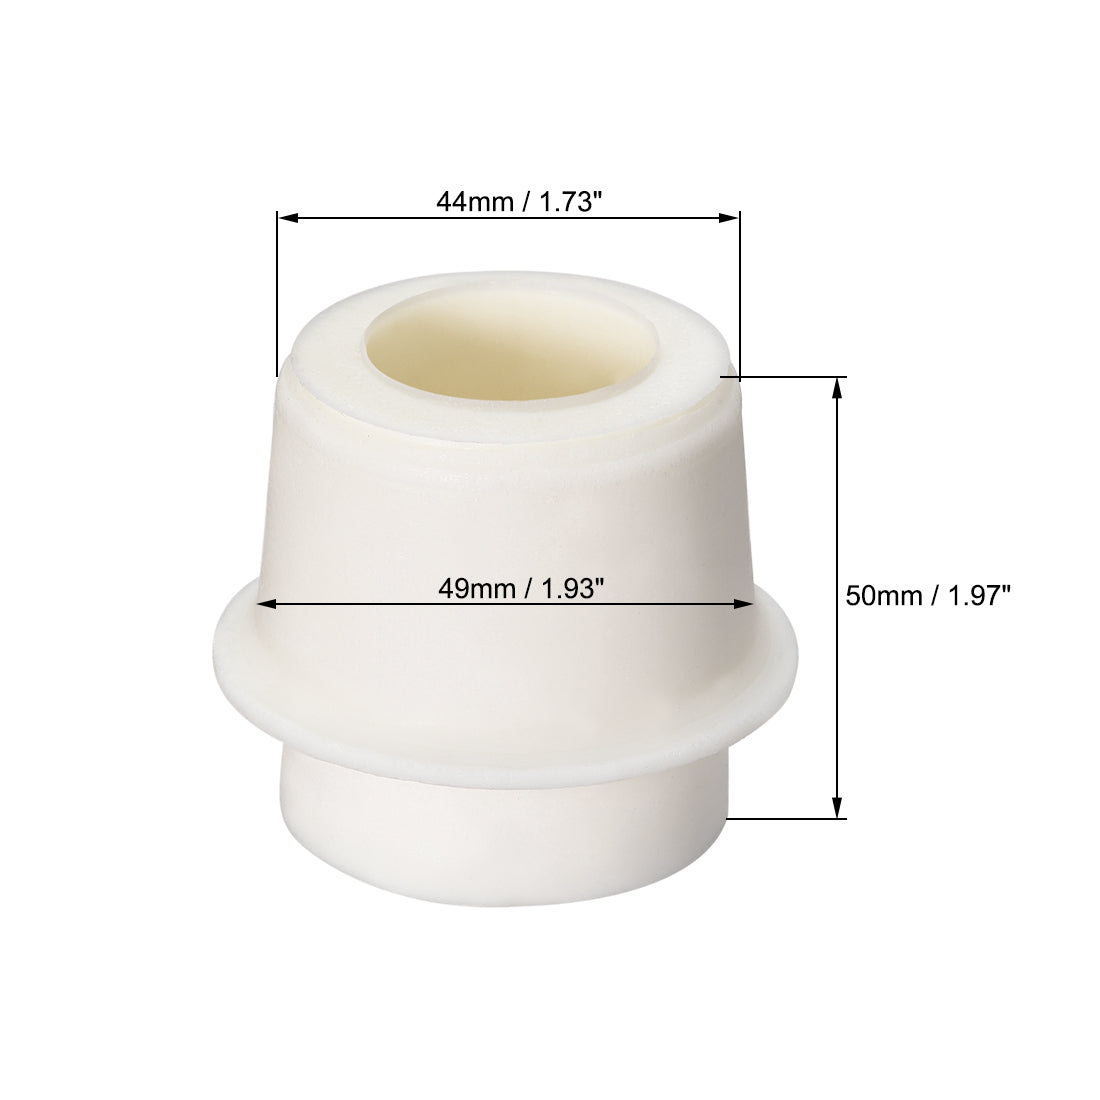 uxcell Uxcell 44-49mm Beige Drilled Silicone Stopper Plugs for Flask Test Tube Stopper